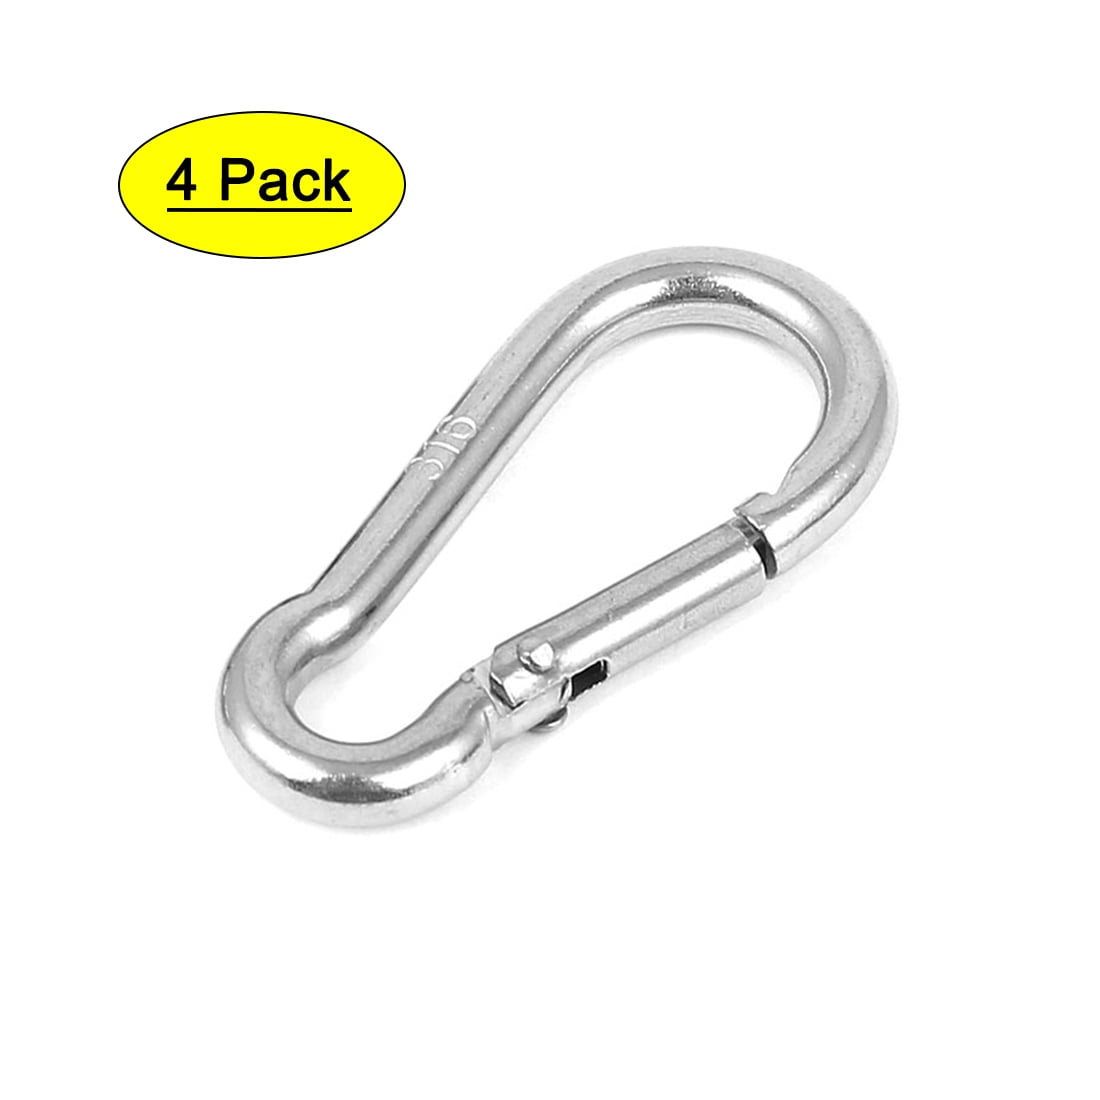 4pcs D-ring Snap Spring Hook Locking Lock Clip Keychain Climbing Backpack Buckle 